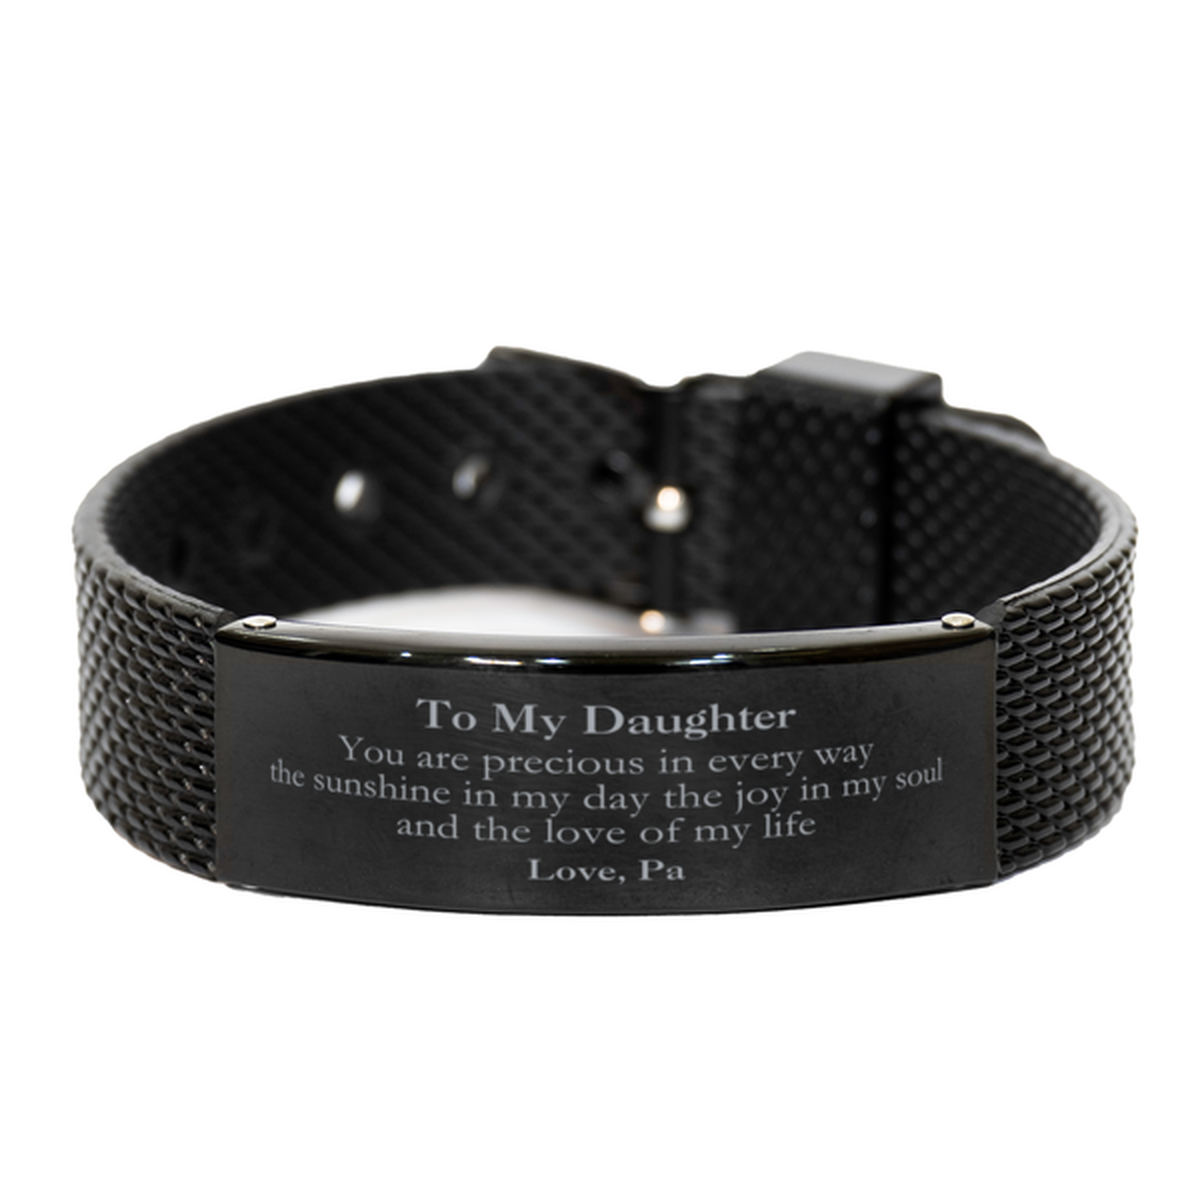 Graduation Gifts for Daughter Black Shark Mesh Bracelet Present from Pa, Christmas Daughter Birthday Gifts Daughter You are precious in every way the sunshine in my day. Love, Pa